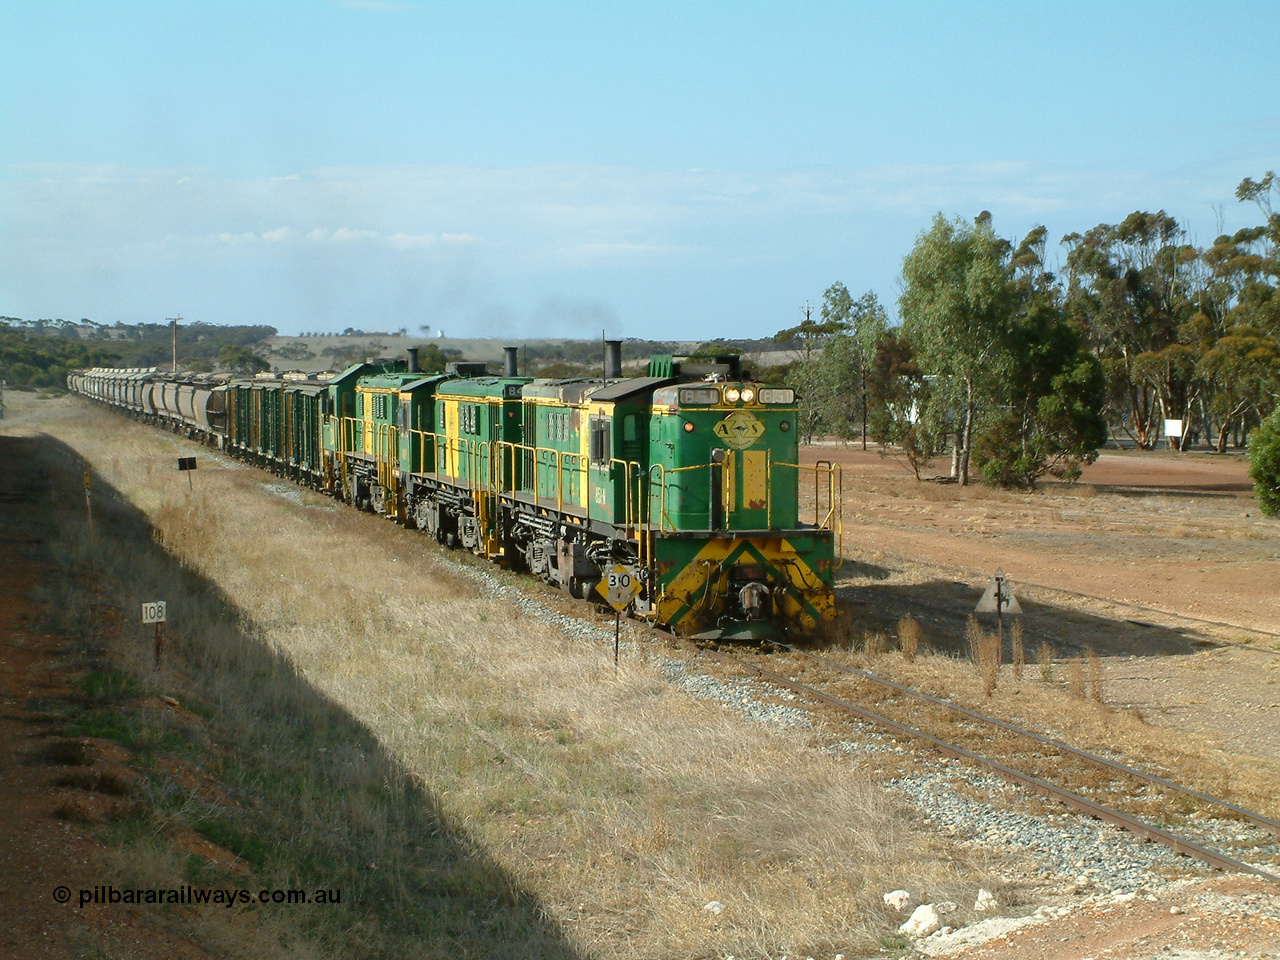 030409 152420
Ungarra, the peace is shattered as a loaded grain train storms upgrade through the station behind 830 class unit 851 AE Goodwin ALCo model DL531 serial 84137, fellow 830 class 842 serial 84140 and a rebuilt DA class unit DA 4.
Keywords: 830-class;851;84137;AE-Goodwin;ALCo;DL531;